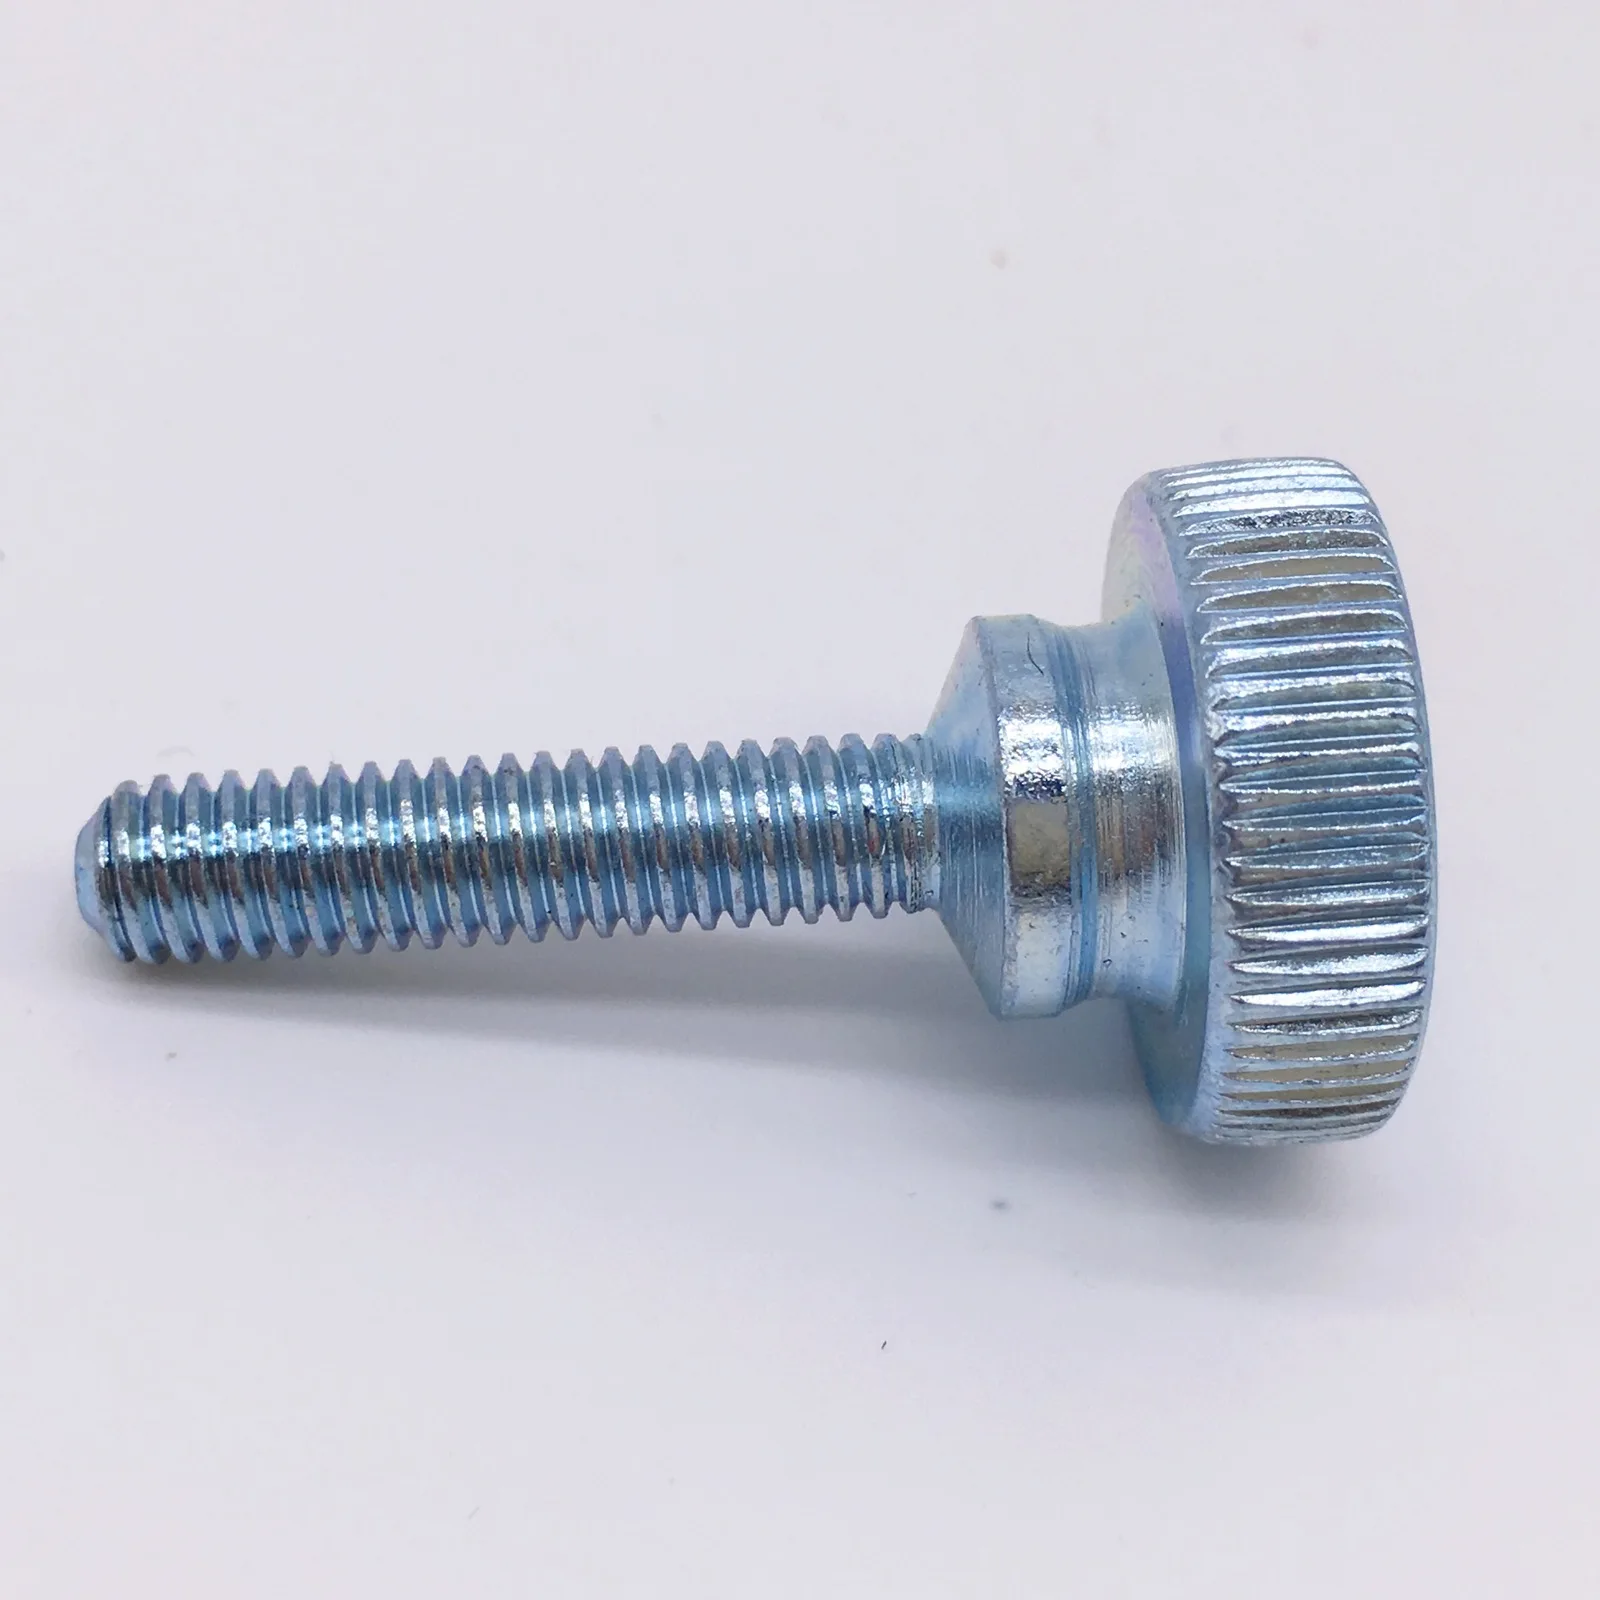 

M10x40 Thumb Screws Knurled Head With Should Bolts Metric Zinc Plated Pack 5